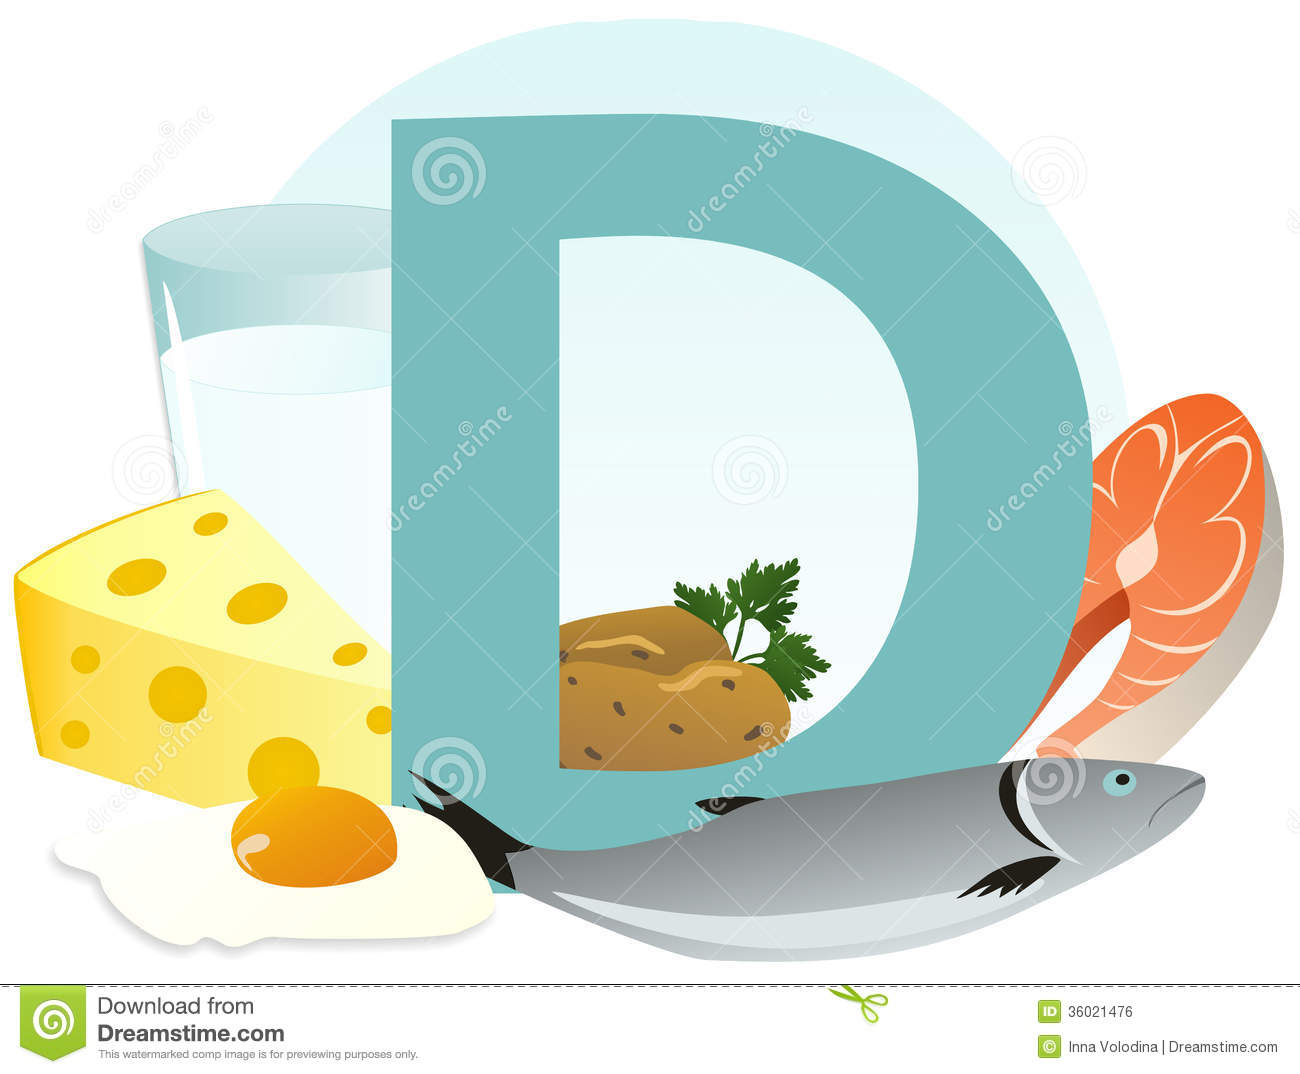 Royalty Free Stock Image  Products Containing Vitamin D